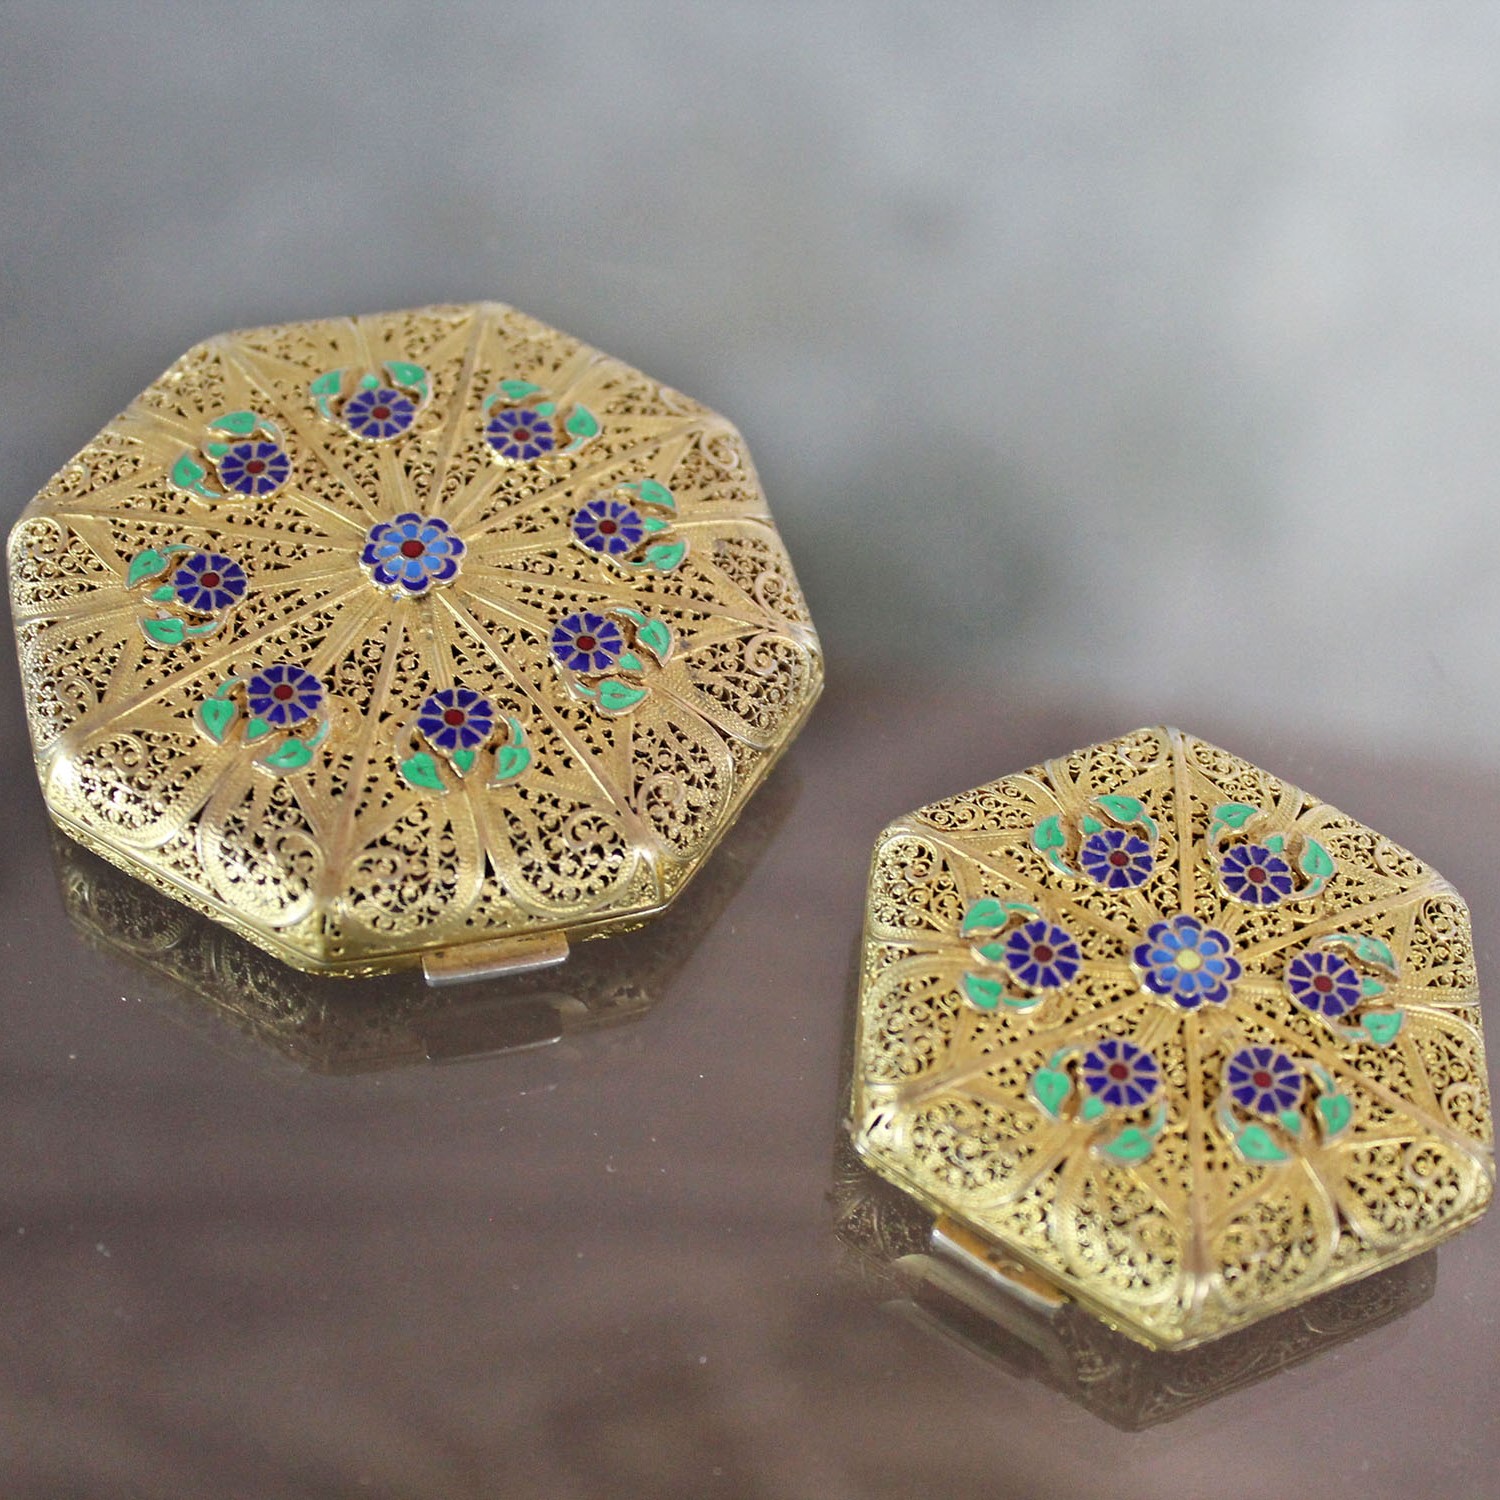 Pair Vintage Octagon Compacts Vermeil Filigree Hallmarked with Enameled Flower Applique